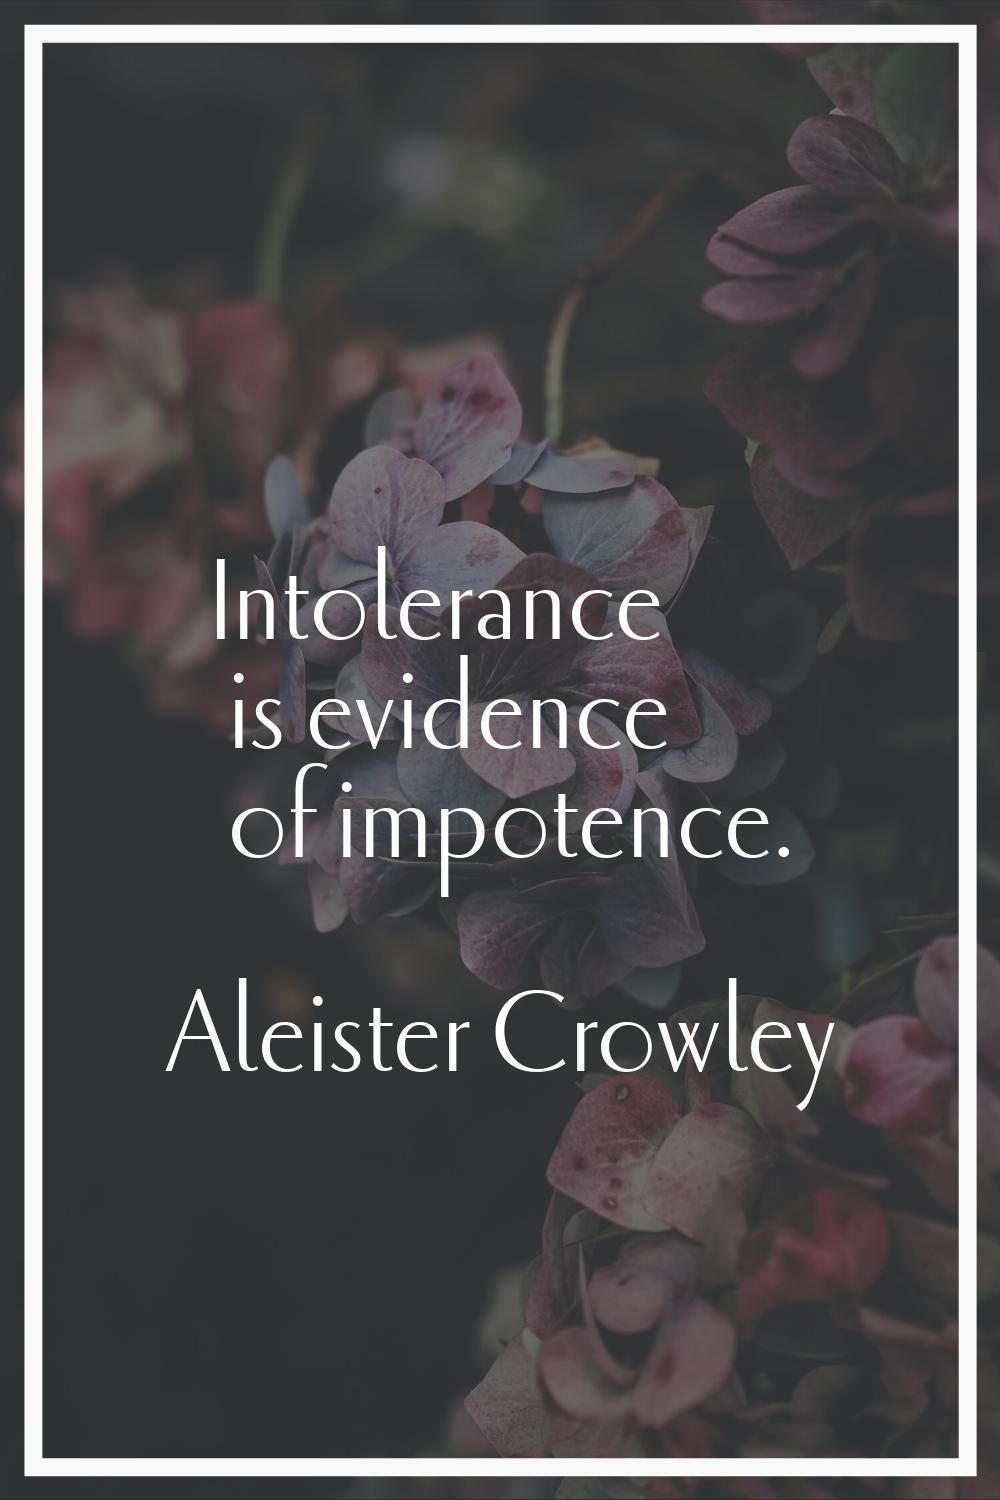 Intolerance is evidence of impotence.